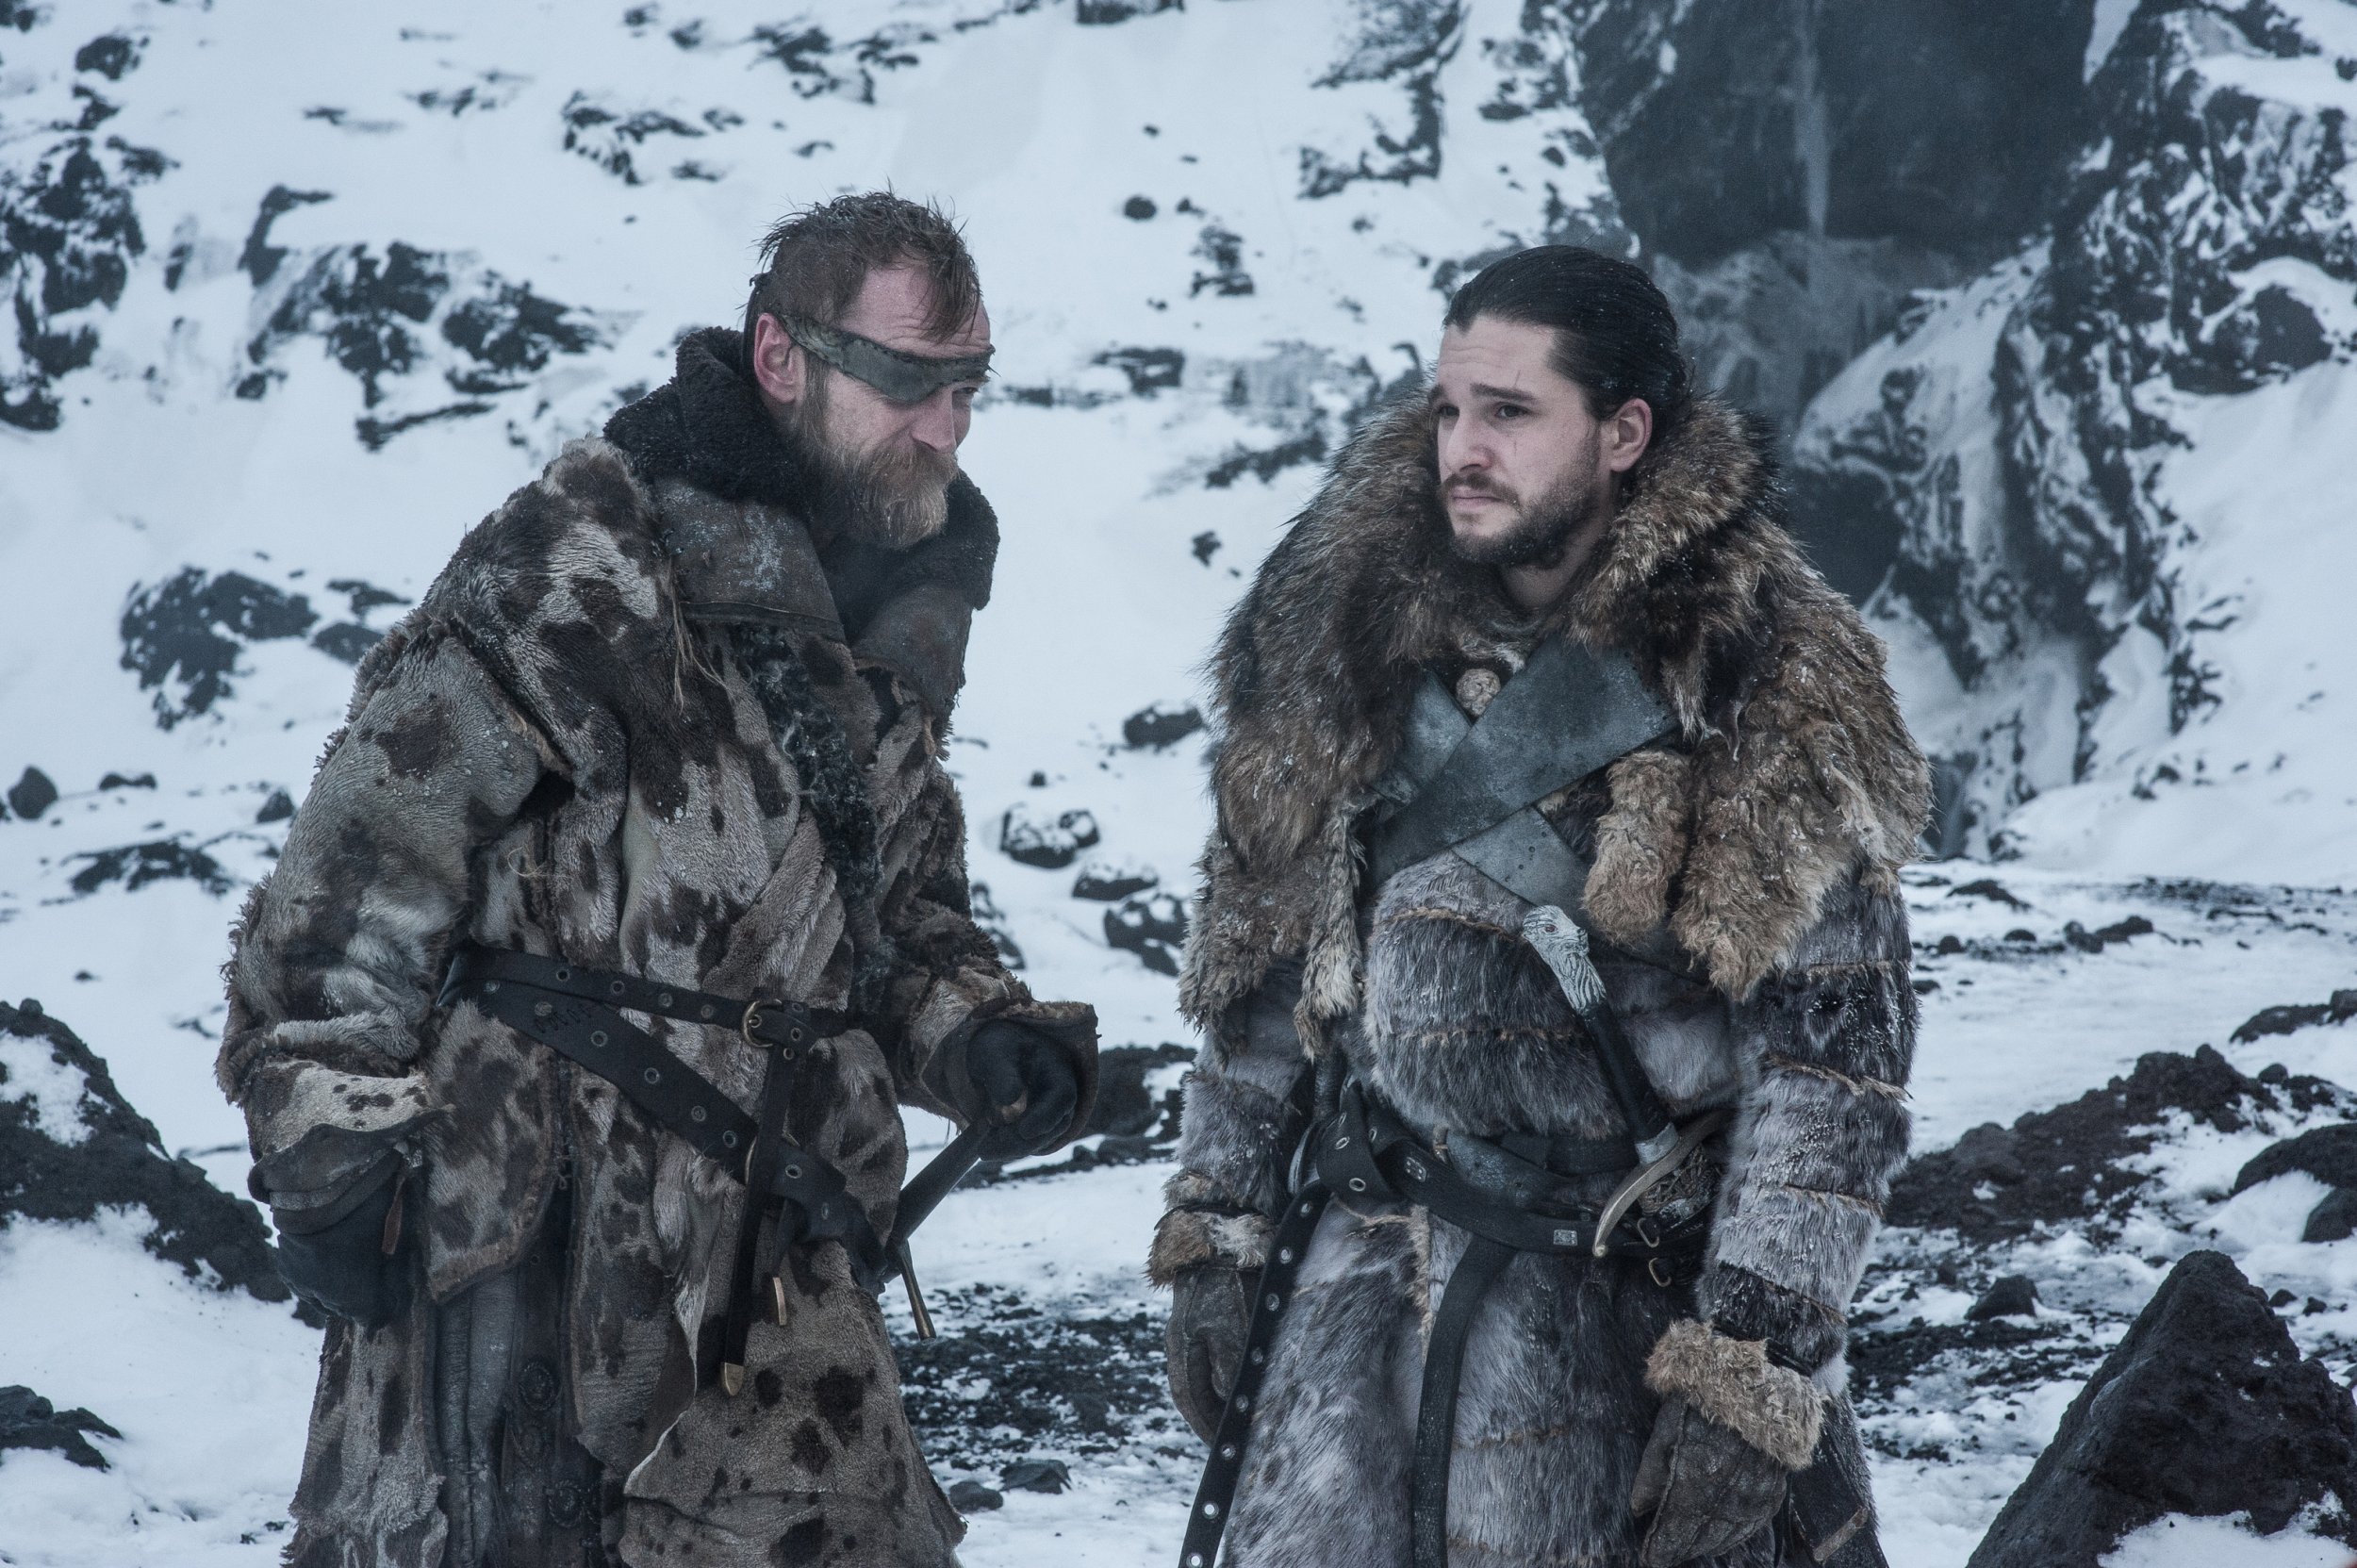 Game of Thrones 6x07 — "Beyond the Wall"